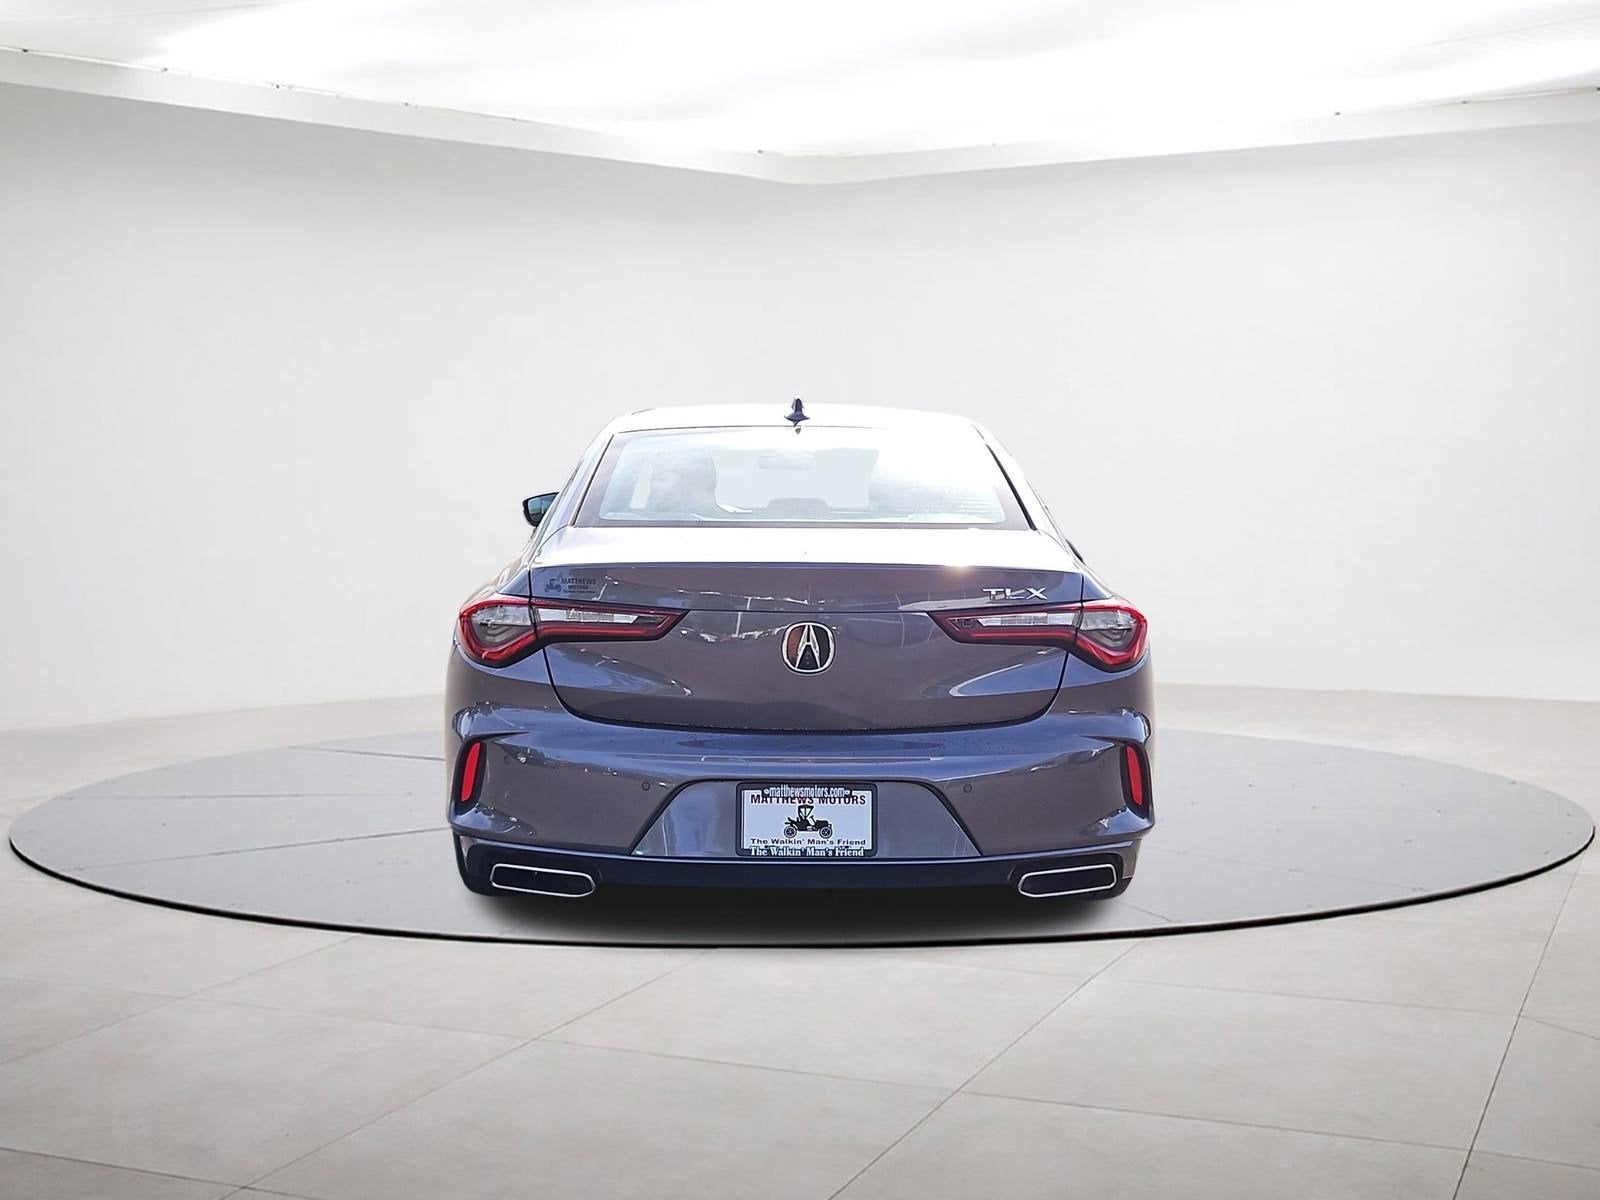 2021 Acura TLX w/ Technology Package